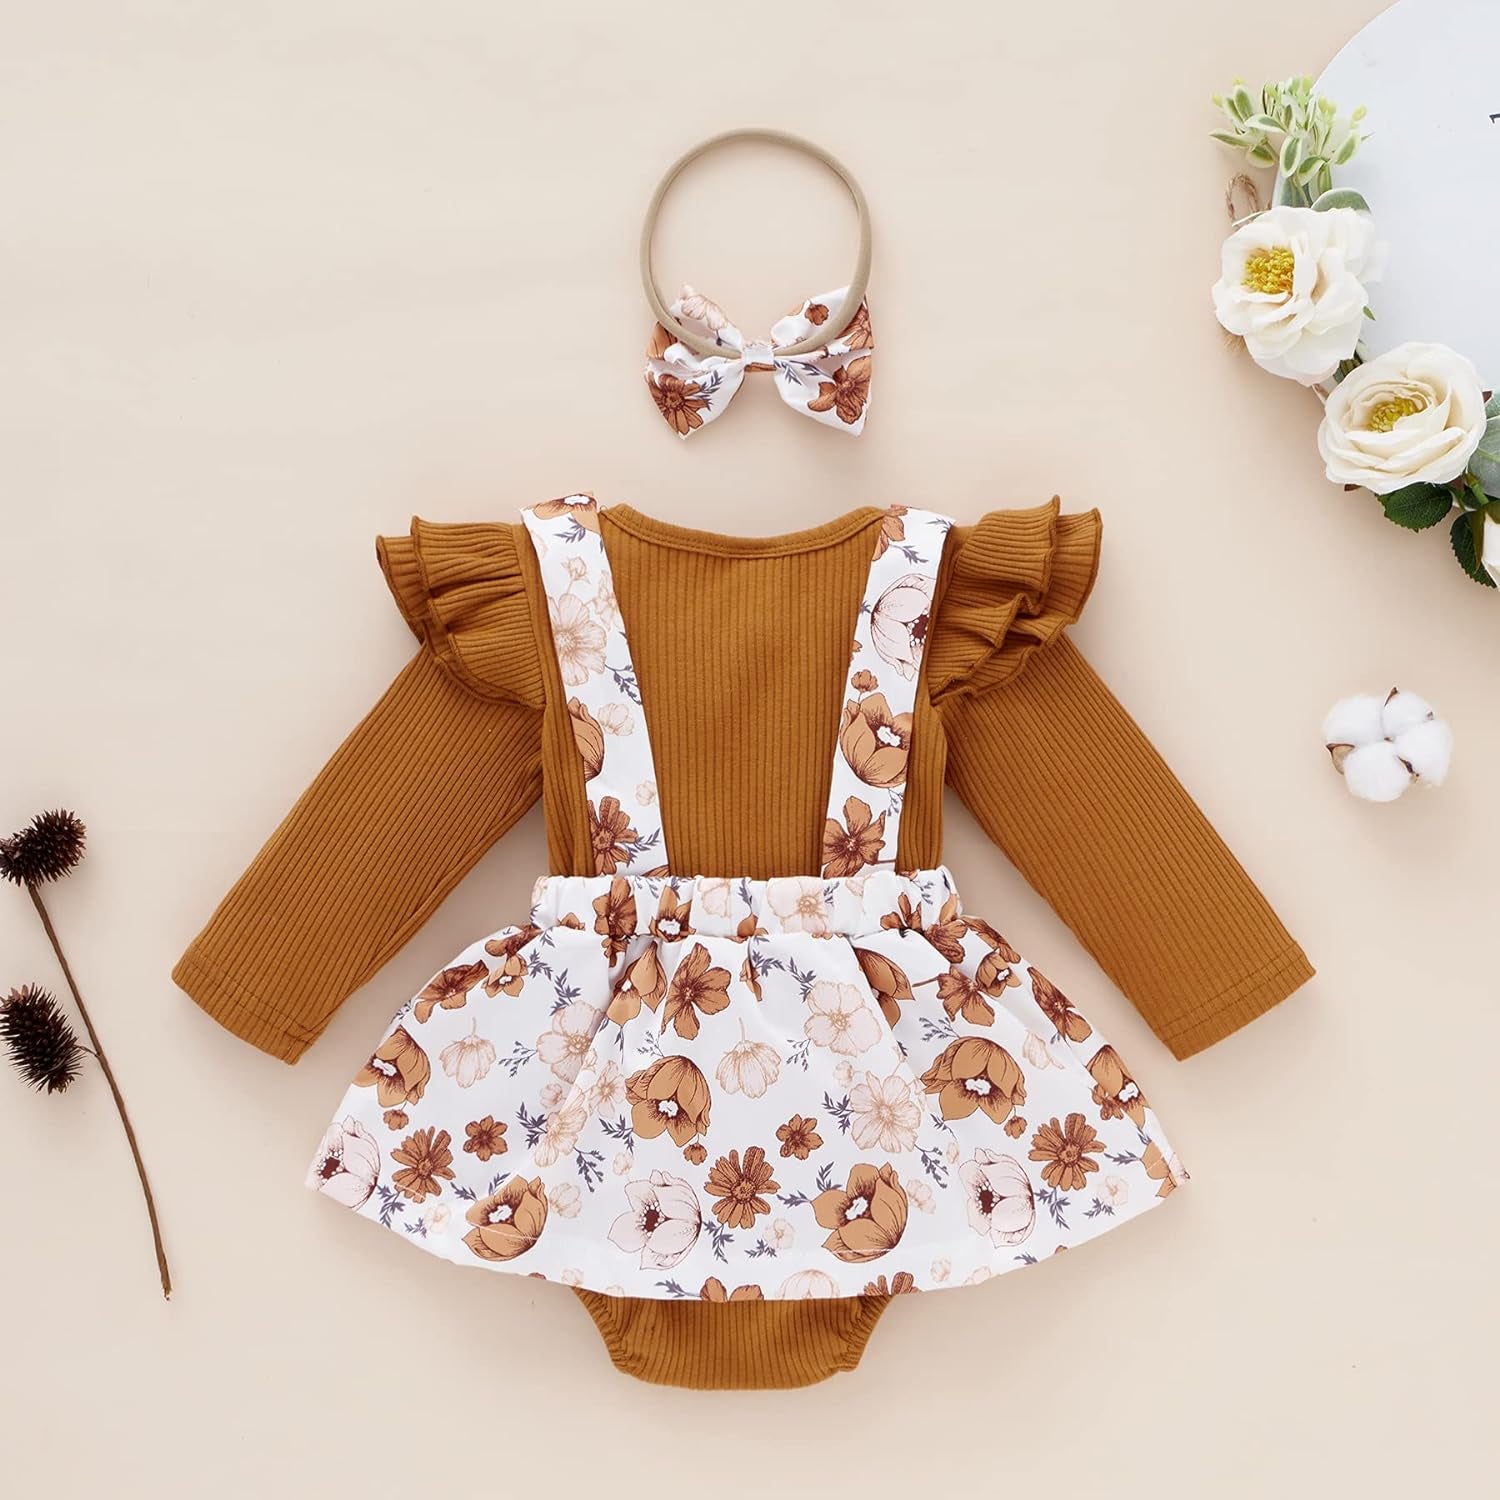 Infant Baby Girl Bodysuits Romper Lace Sweater Onesie Shorts Ruffle Long Sleeve Newborn Fall Winter Clothes (Khaki, 18-24 Months)